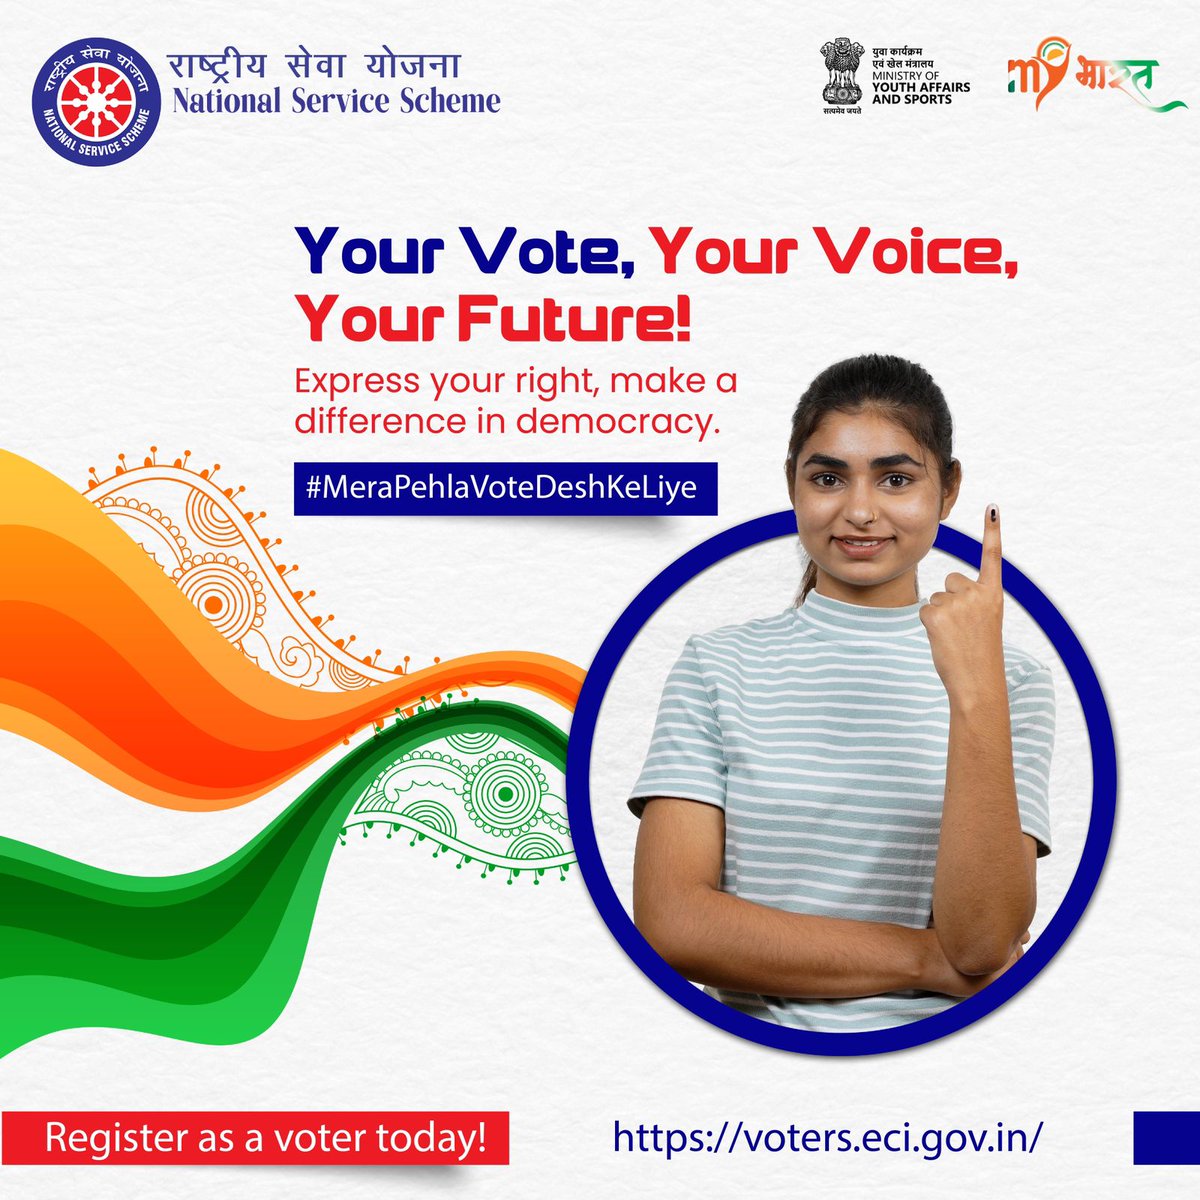 As young citizens, our votes shape the world we want to live in. Don't sit back, step up! Your vote isn’t just a right, it's your strength. Register as a voter today! #voterawareness #MeraPehlaVoteDeshKeLiye #Vote4Sure